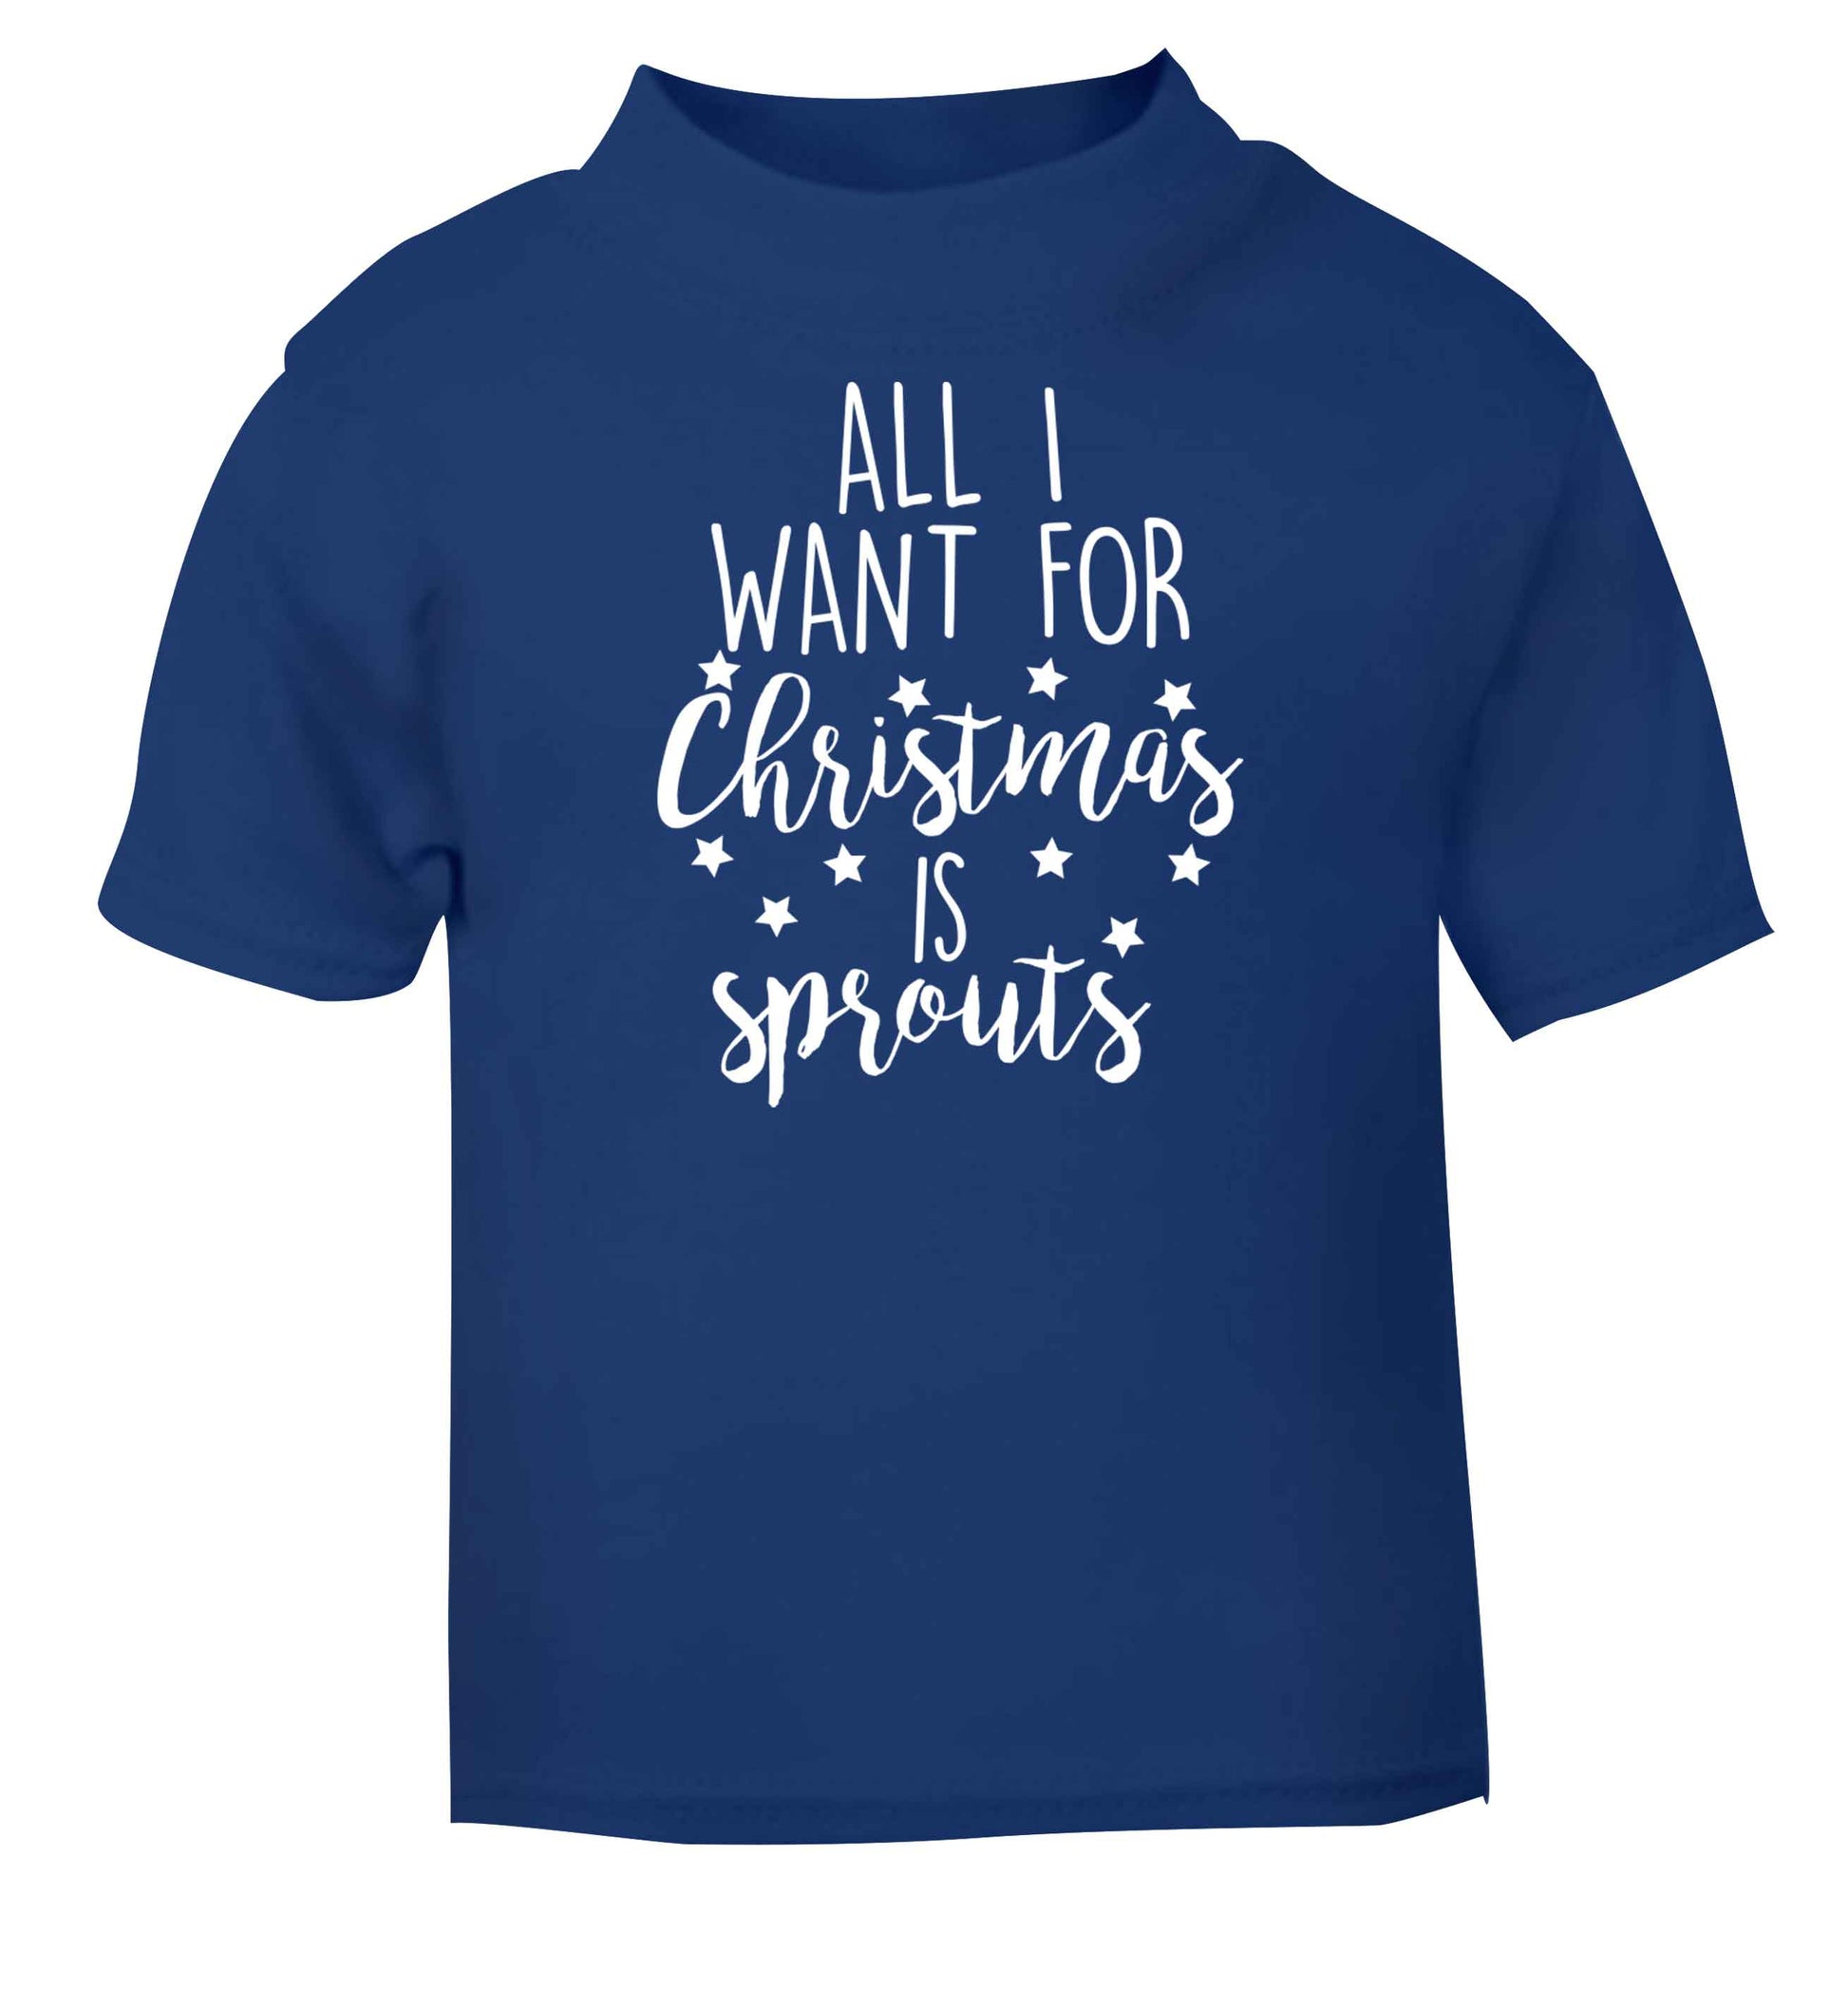 All I want for Christmas is sprouts blue baby toddler Tshirt 2 Years